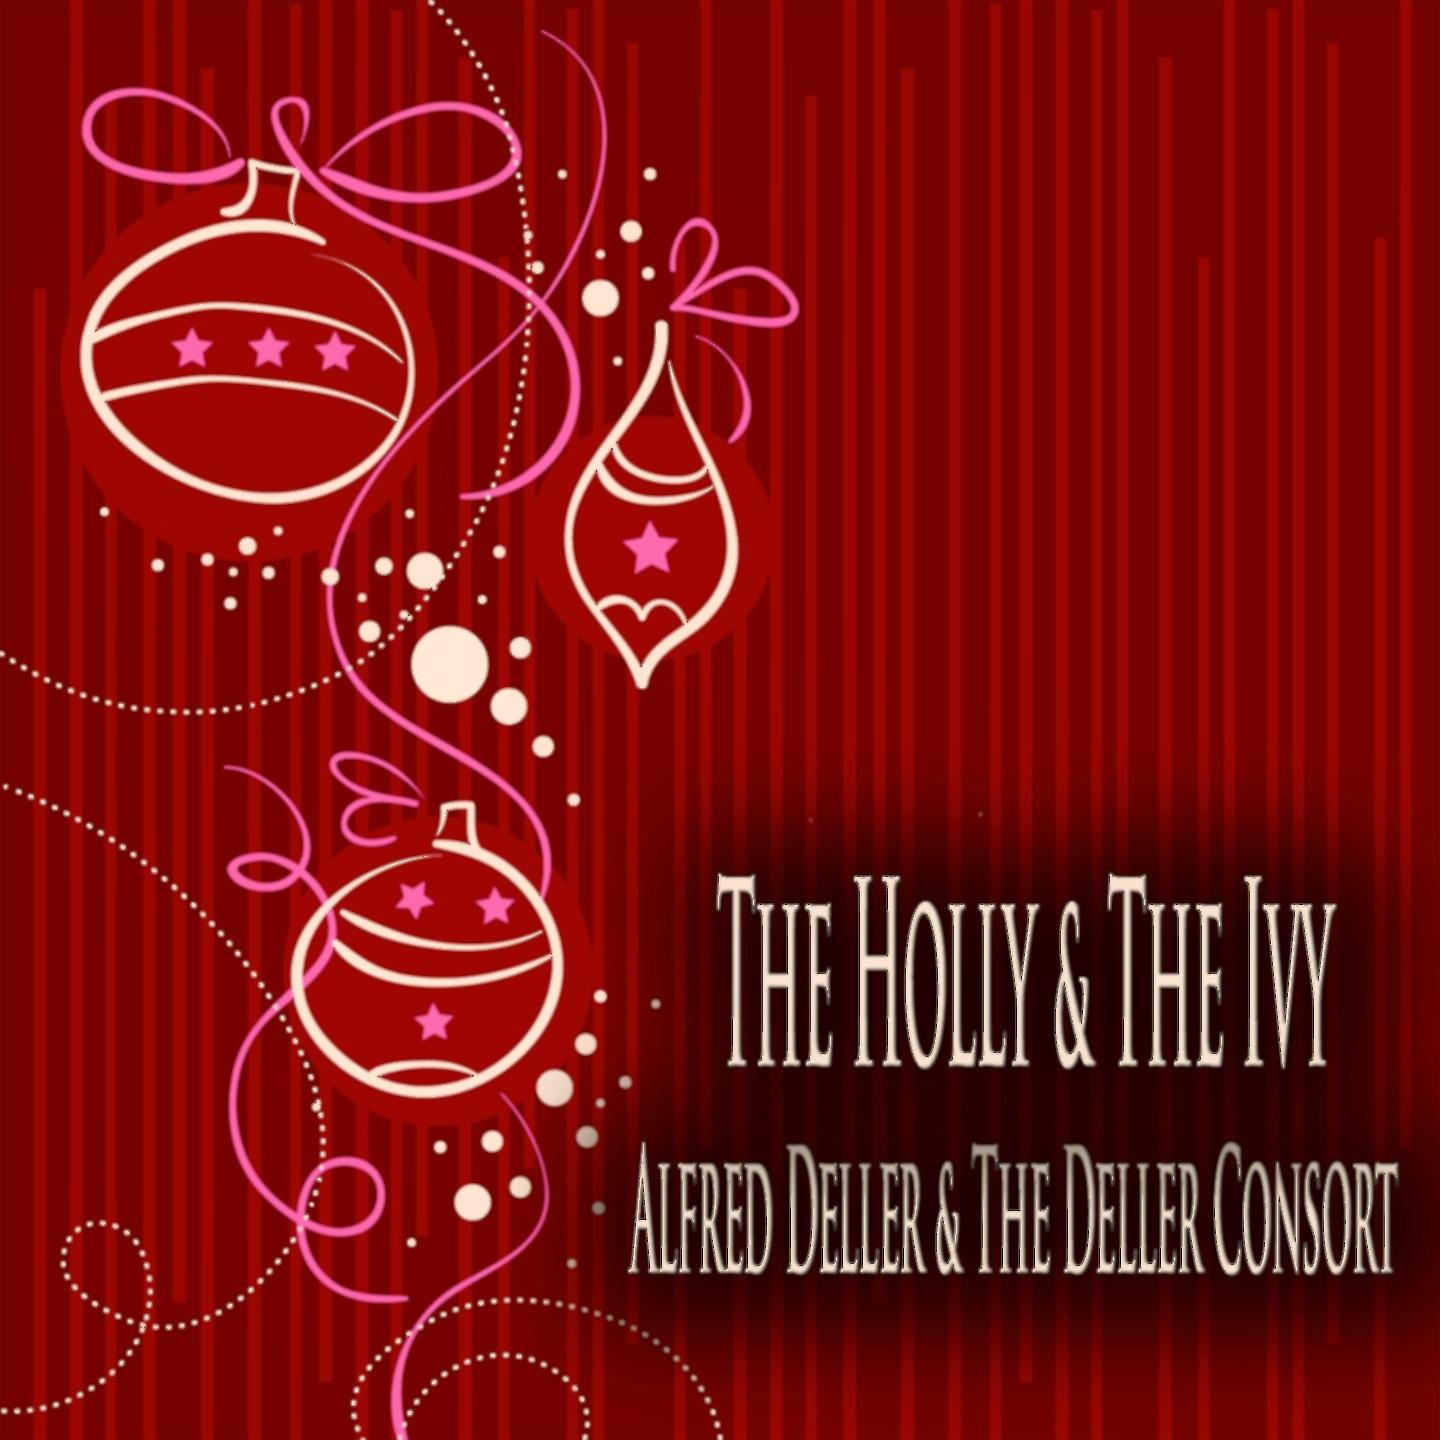 The Holly & the Ivy (Christmas Recordings - Remastered)